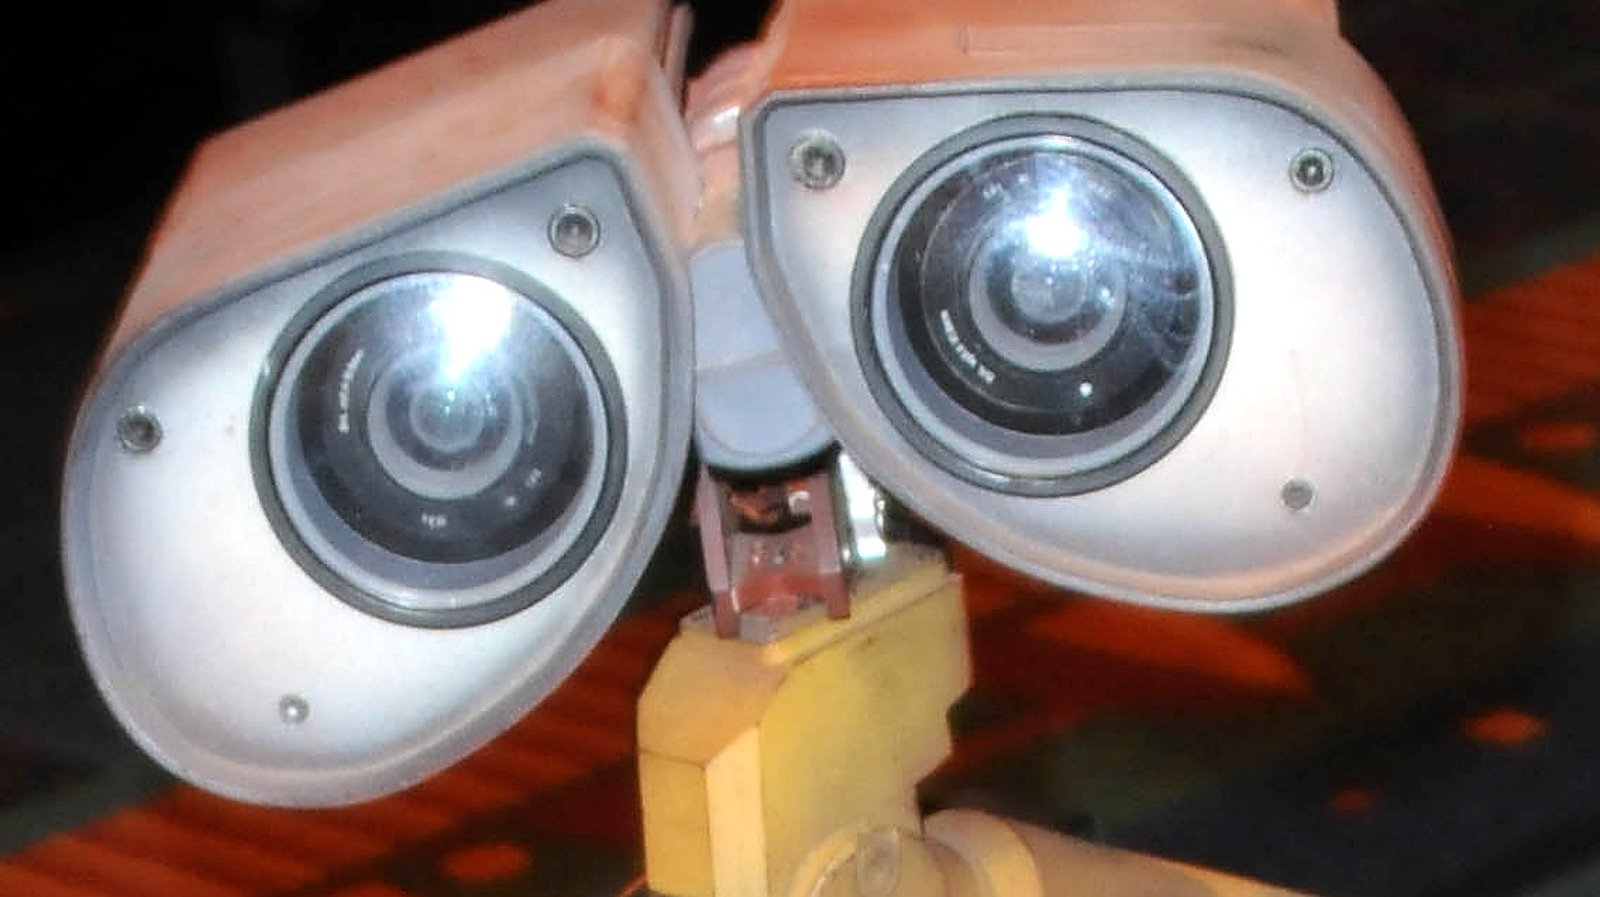 The Simple Scene In Pixar's Wall-E That Fans Agree Says So Much